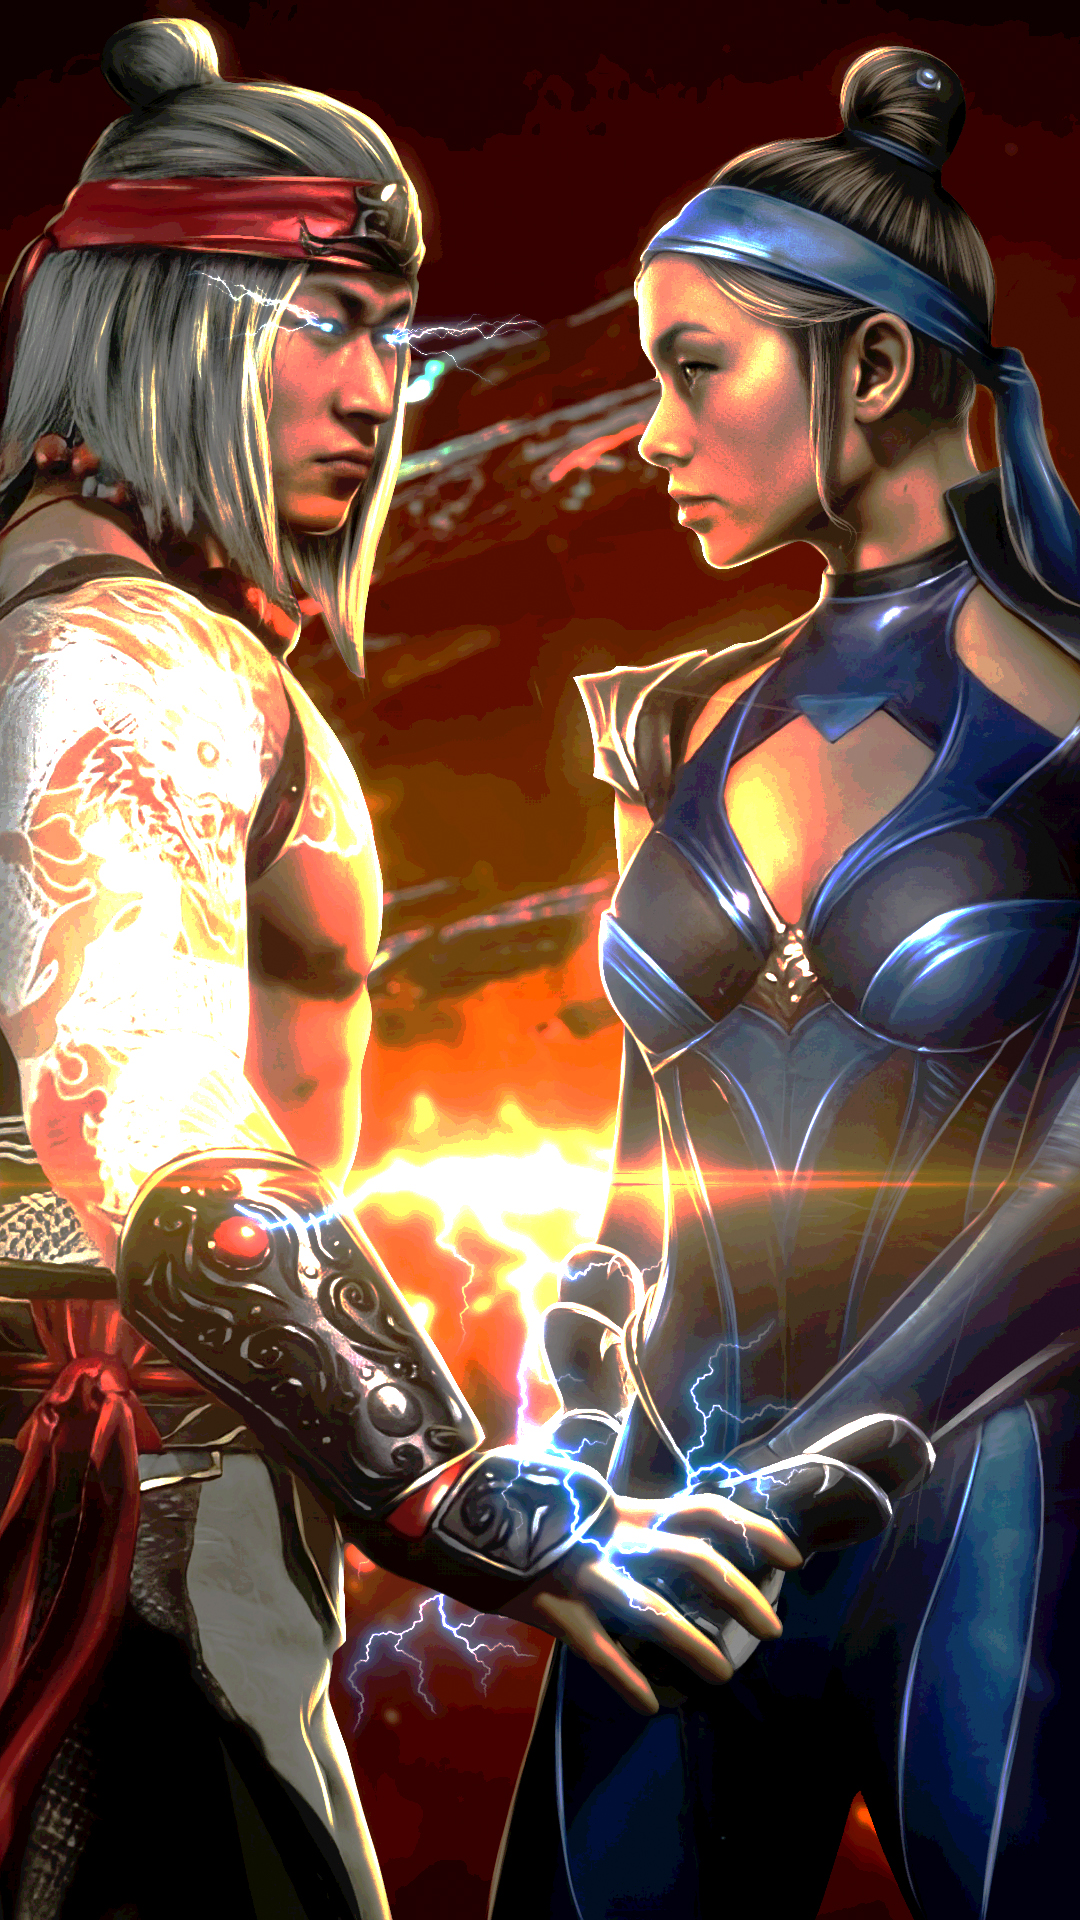 Agentkennedy ð dead spaceáµá on i want to thank juliokahnn for this awesome phone wallpaper of liu kang and kitana imo that is the ending for me lt httpstcomferxjjvcp